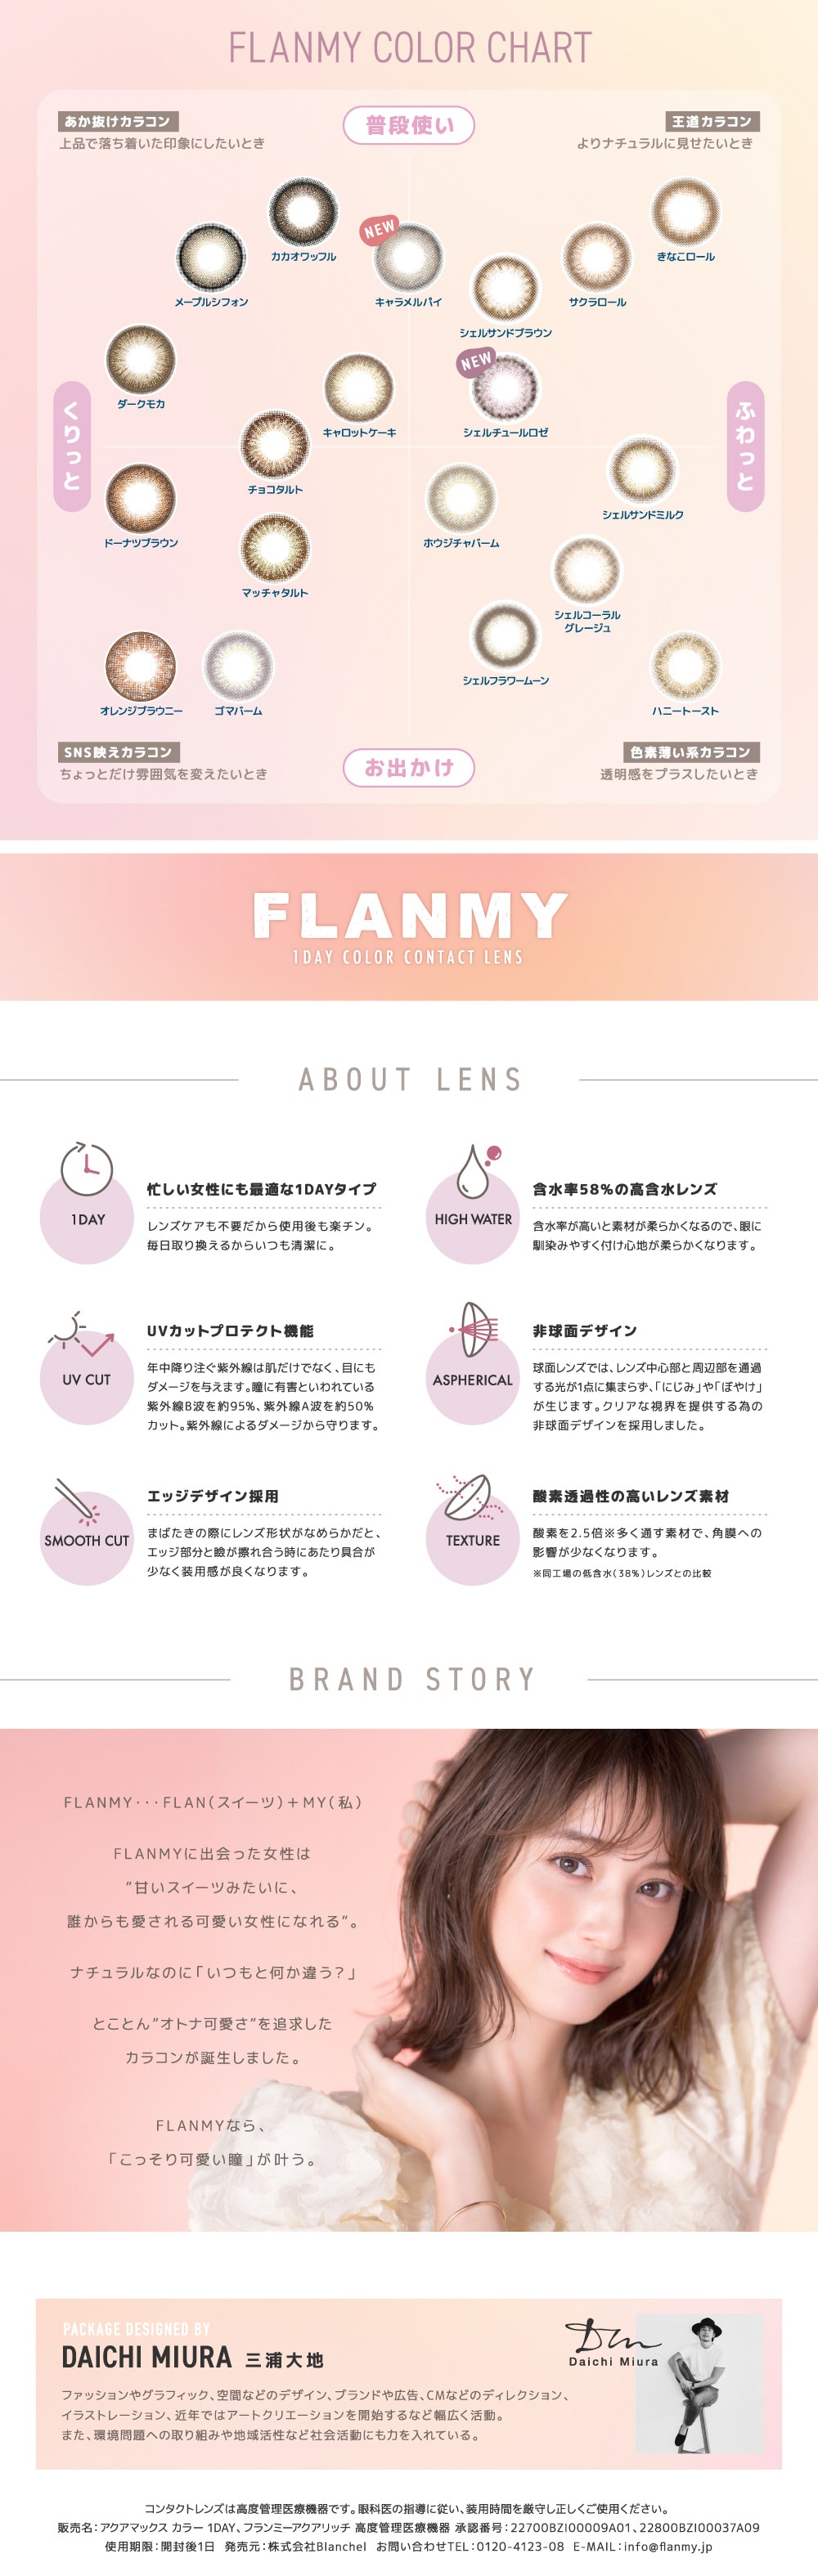 FLANMY COLOR CHART